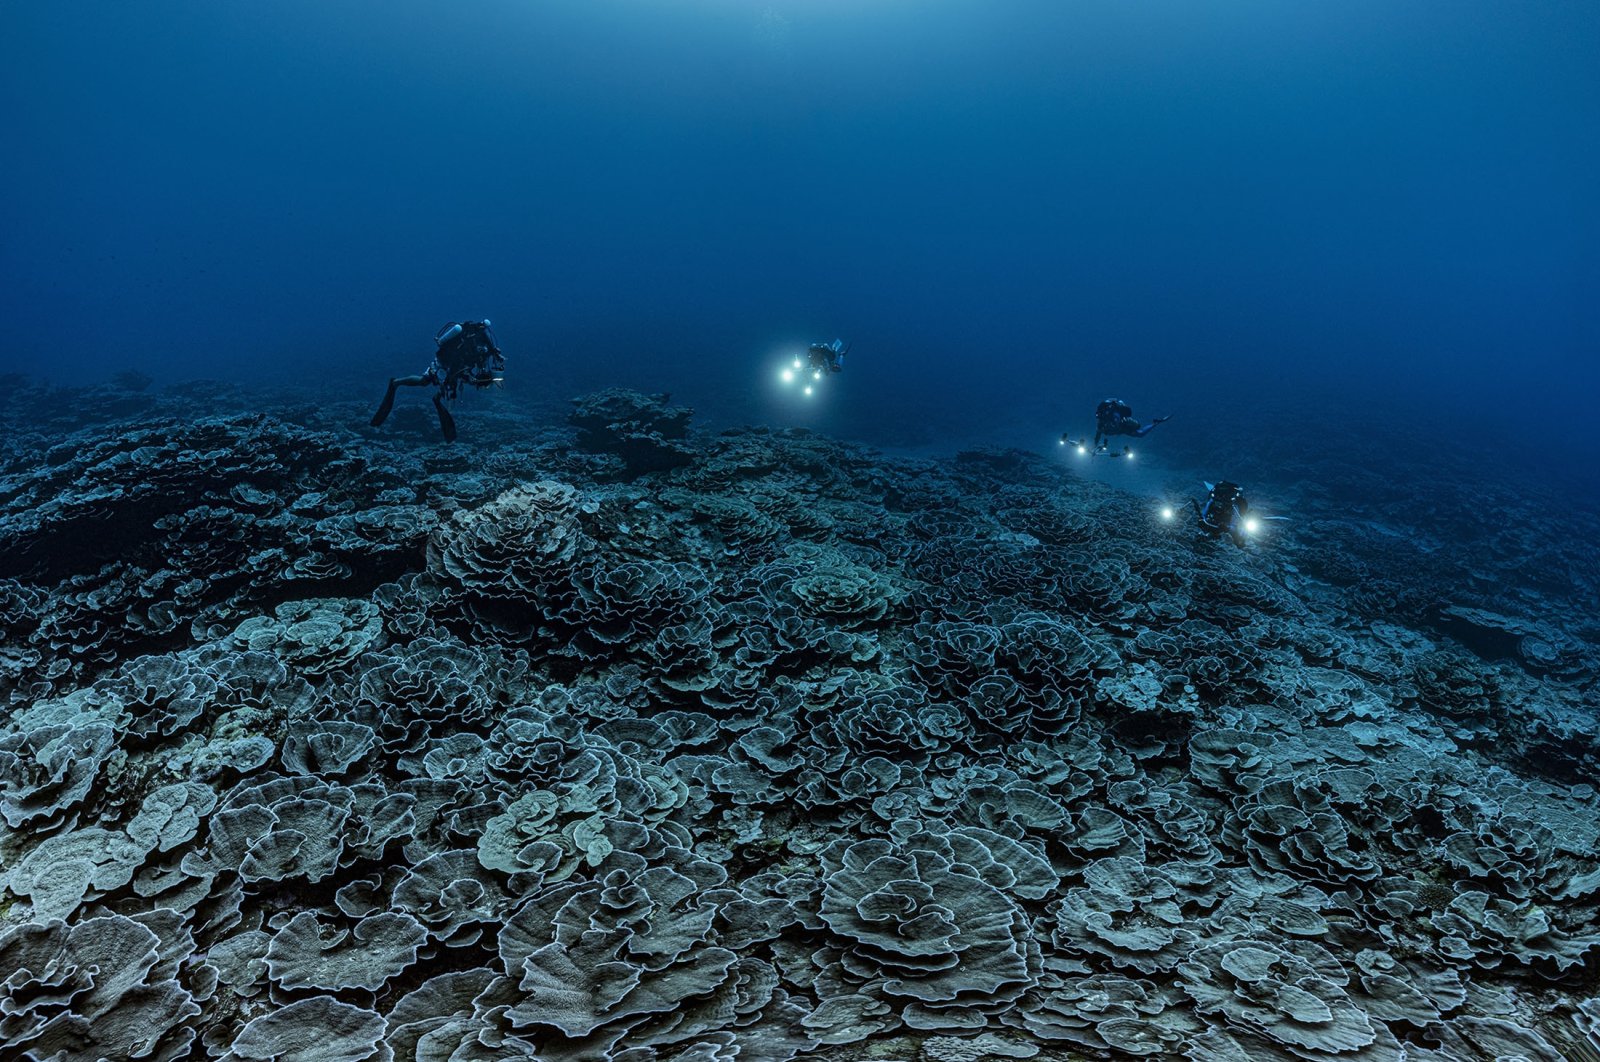 Researchers for the French National Center for Scientific Research study corals in the waters off the coast of Tahiti of the French Polynesia, Dec., 2021. (Alexis Rosenfeld via AP)